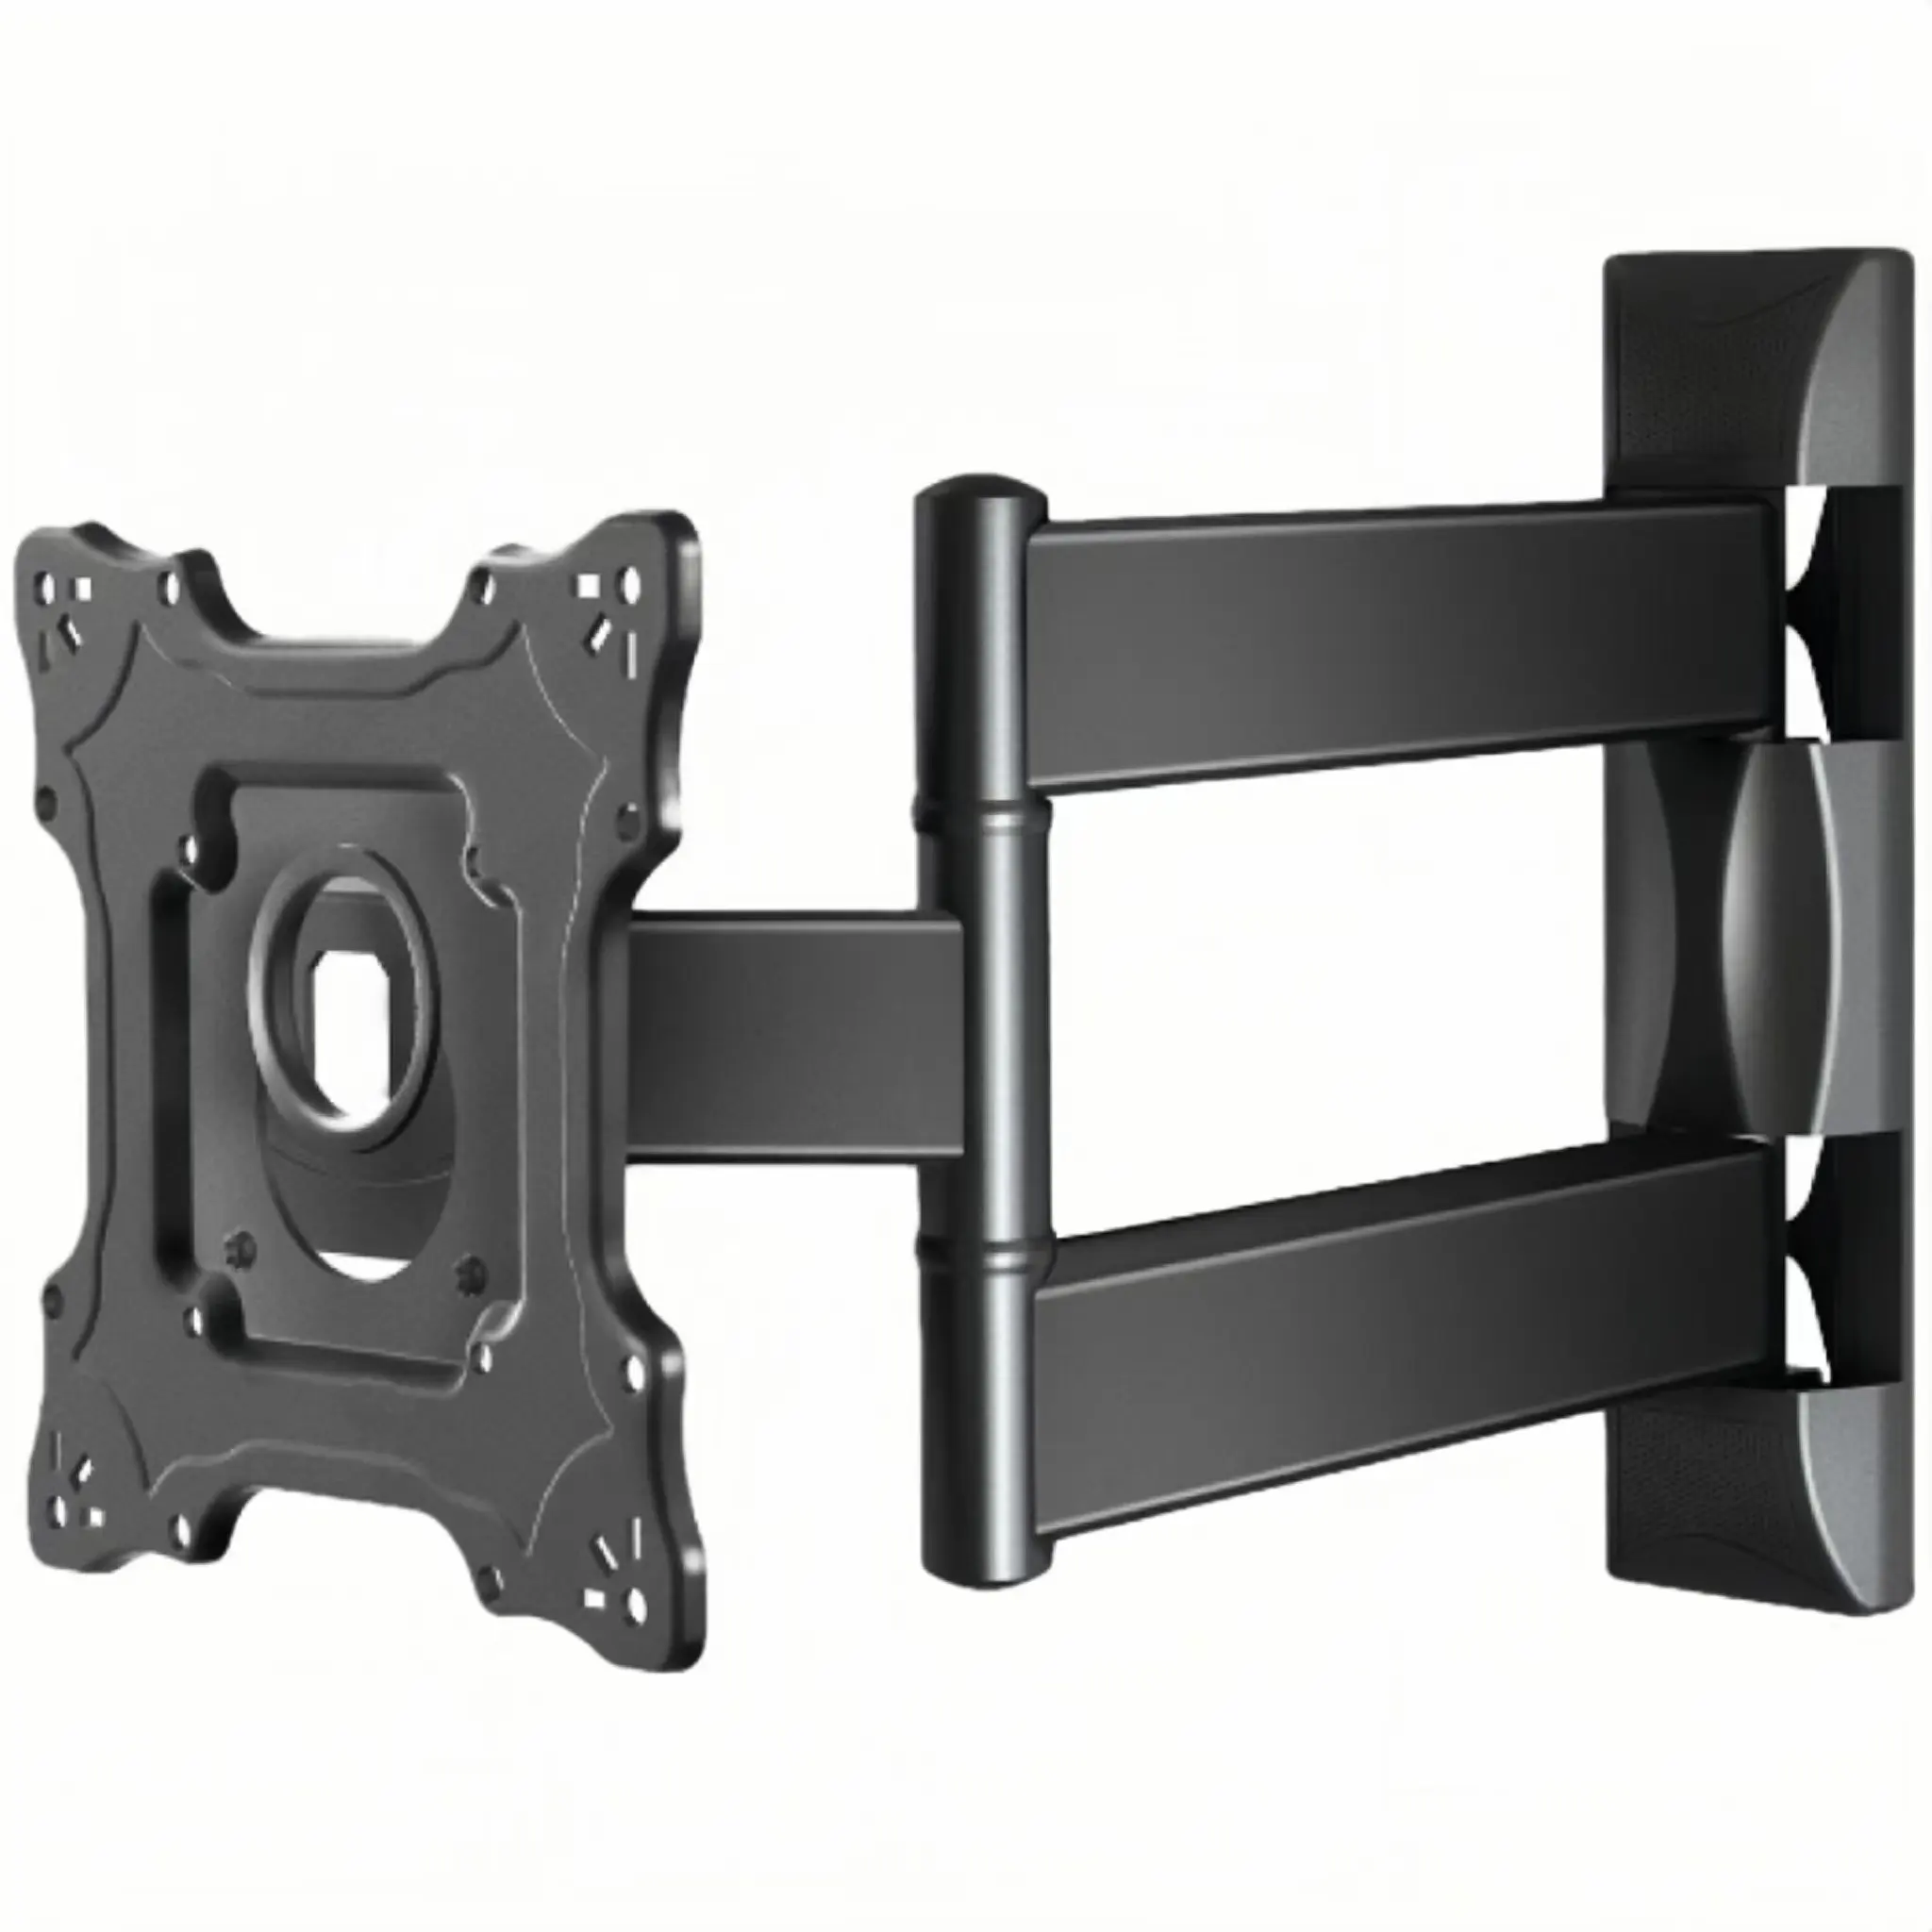 TV Wall Mount for 17" to 43-inch Screens up to 77 lbs Full Motion Arm FK-25 Black